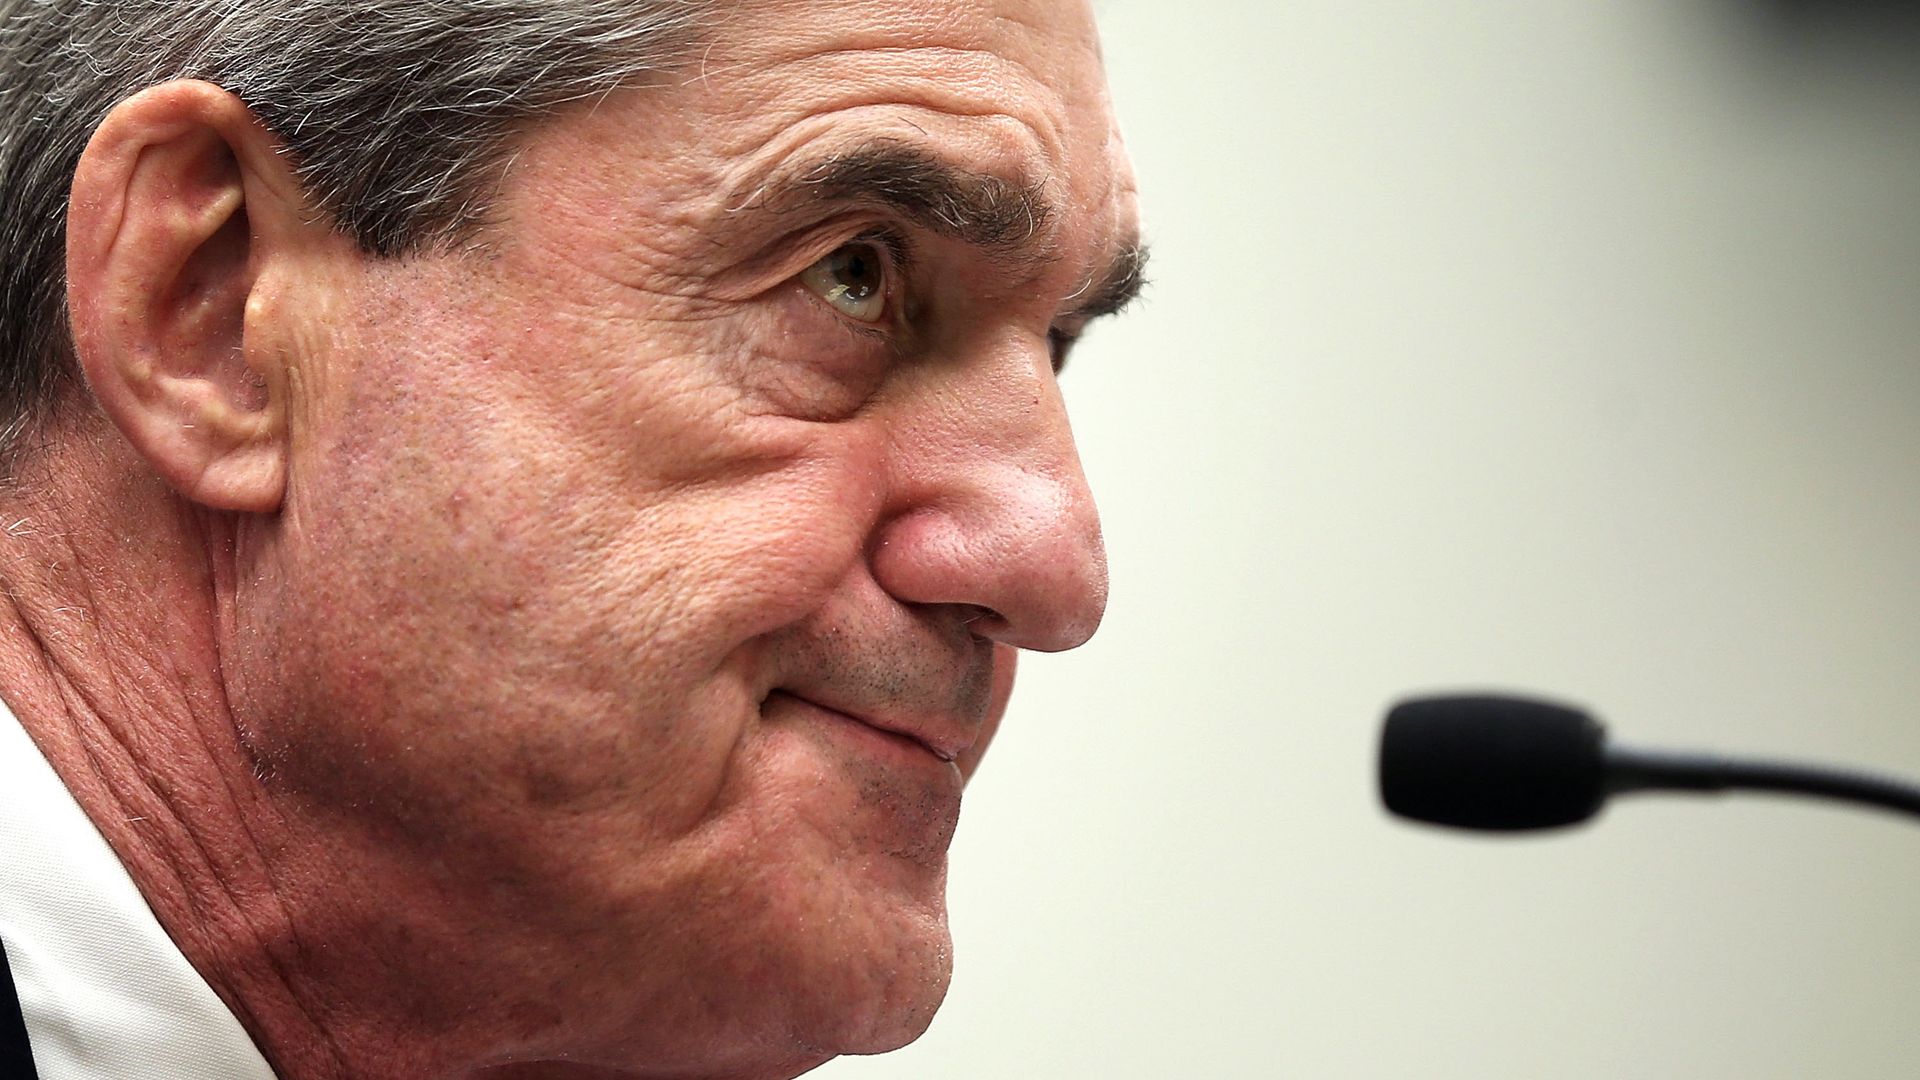 This image is a closeup of the profile of Mueller's face. 